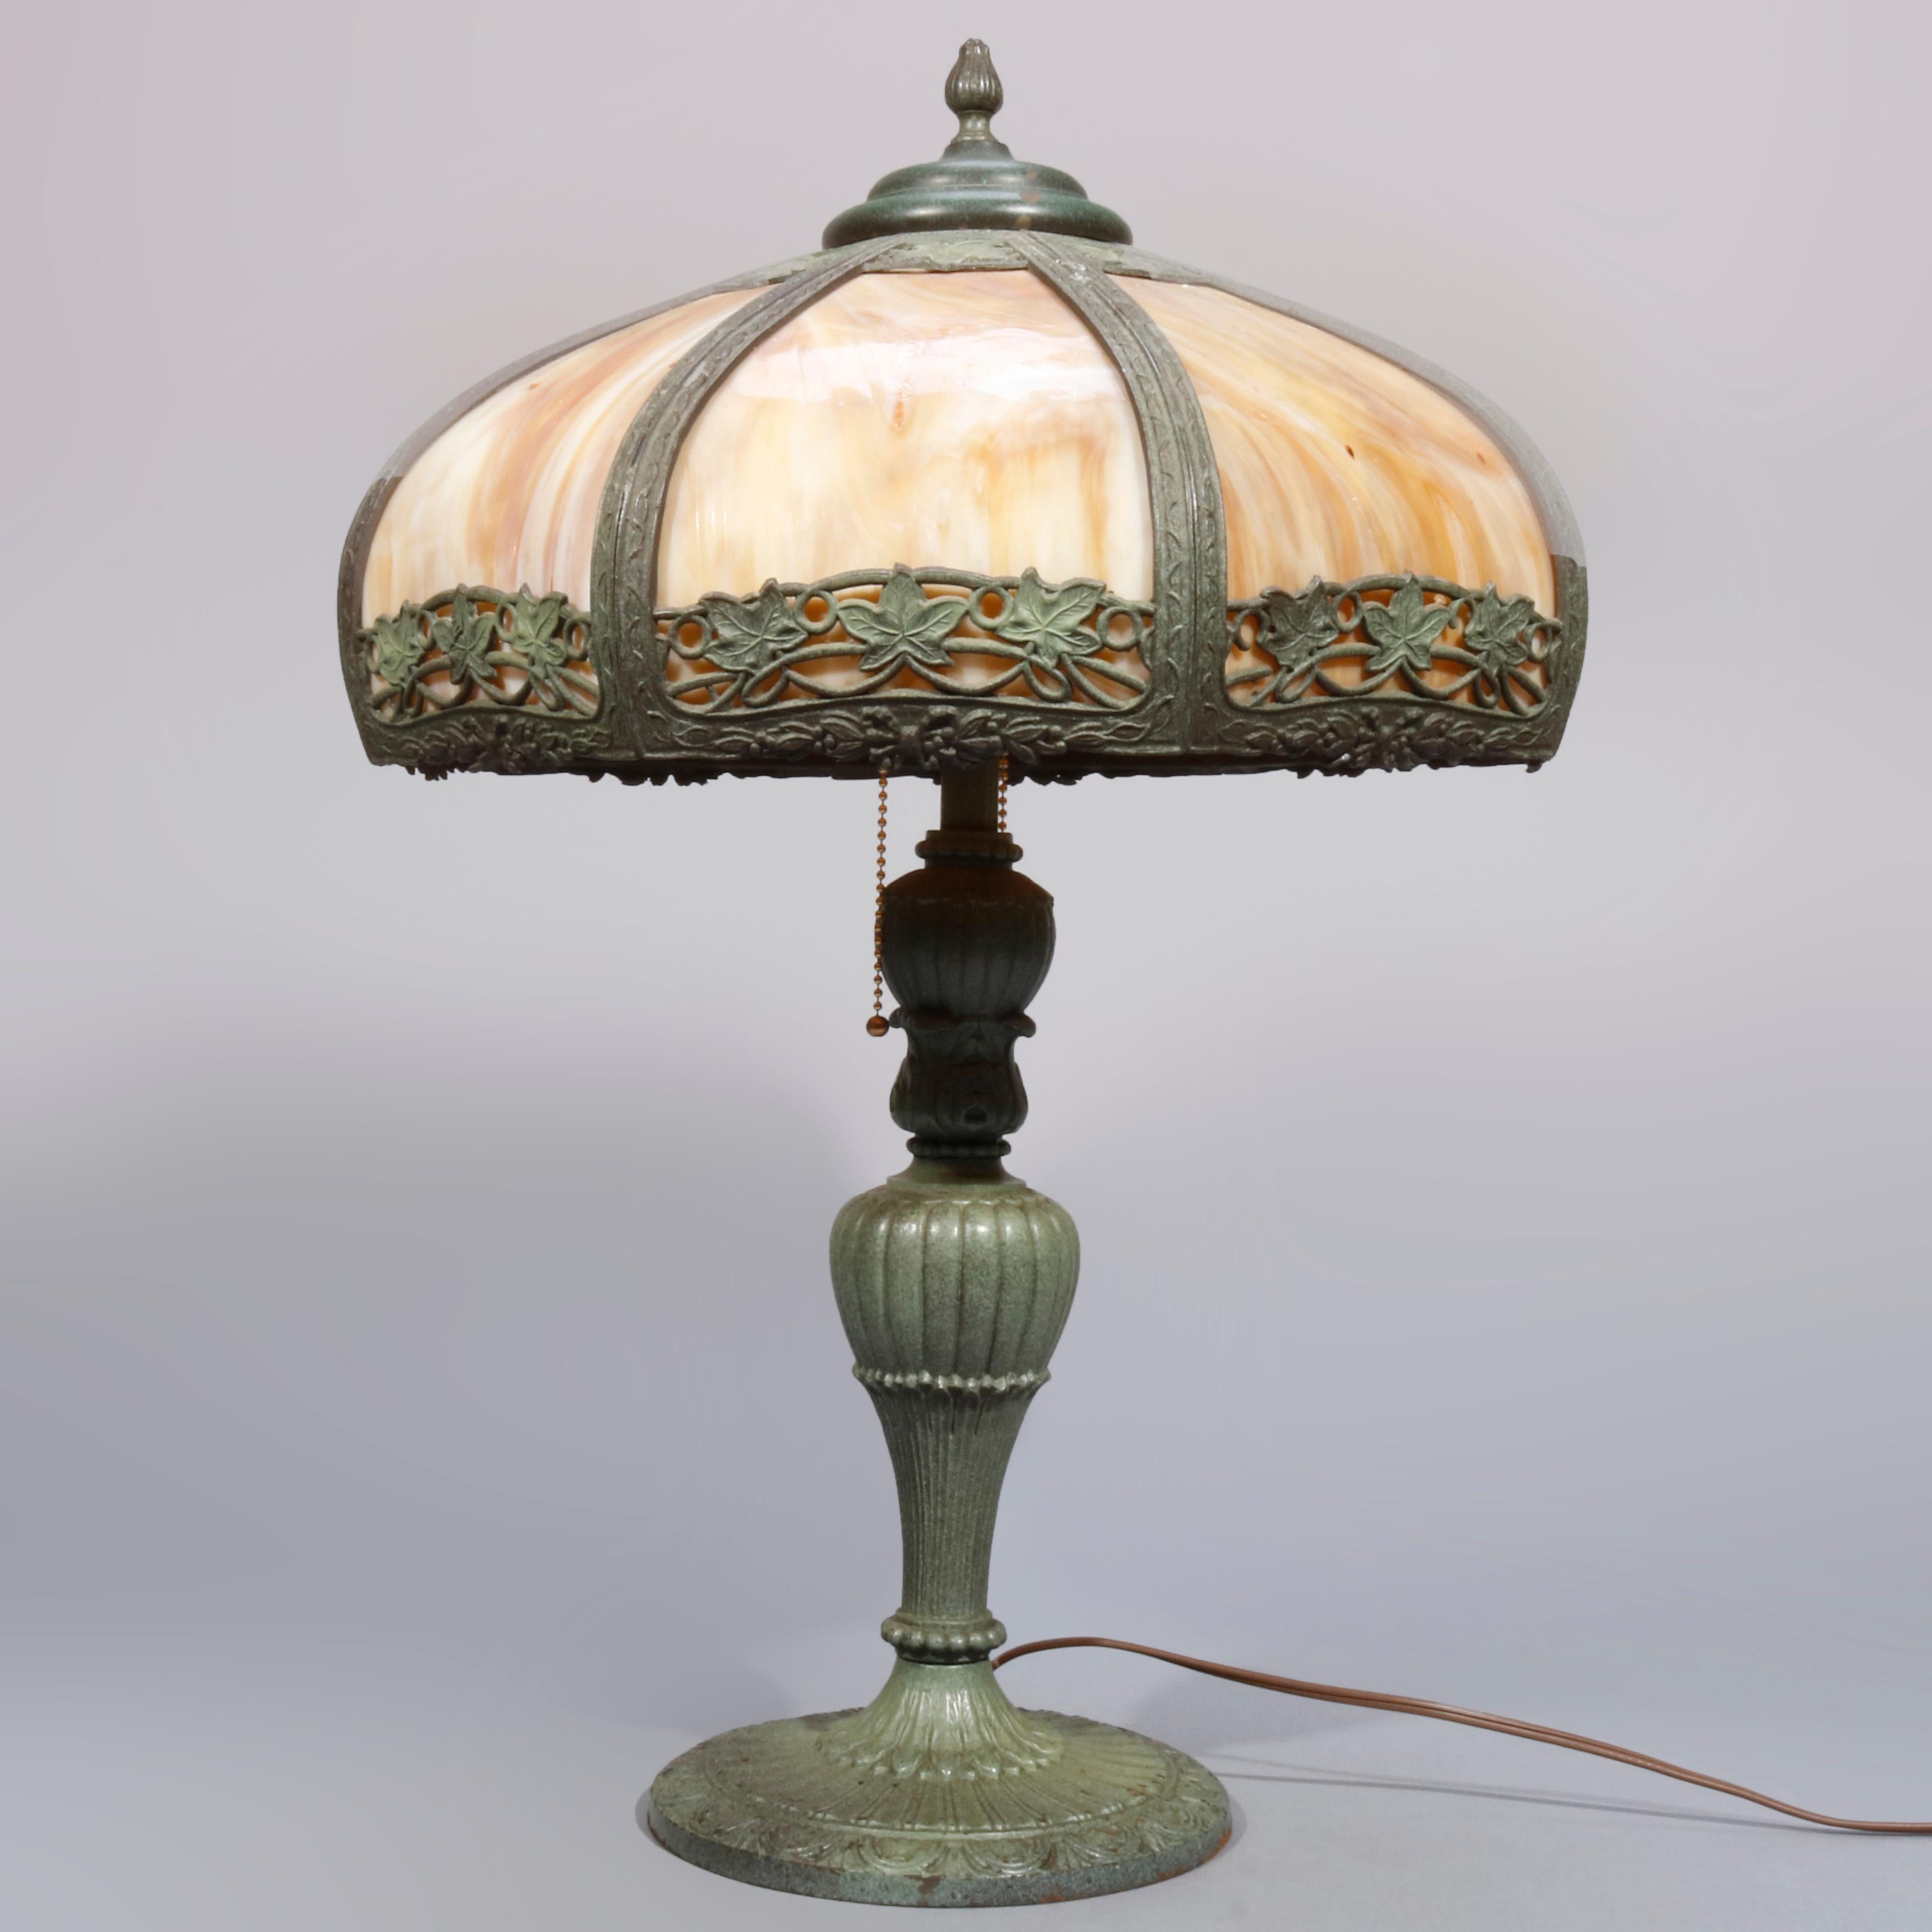 An antique table lamp in the manner of Bradley & Hubbard offers cast foliate filigree shade with verdigris finish and housing curved slag glass panels surmounting double socket cast urn form base, circa 1920

Measures: 23.25